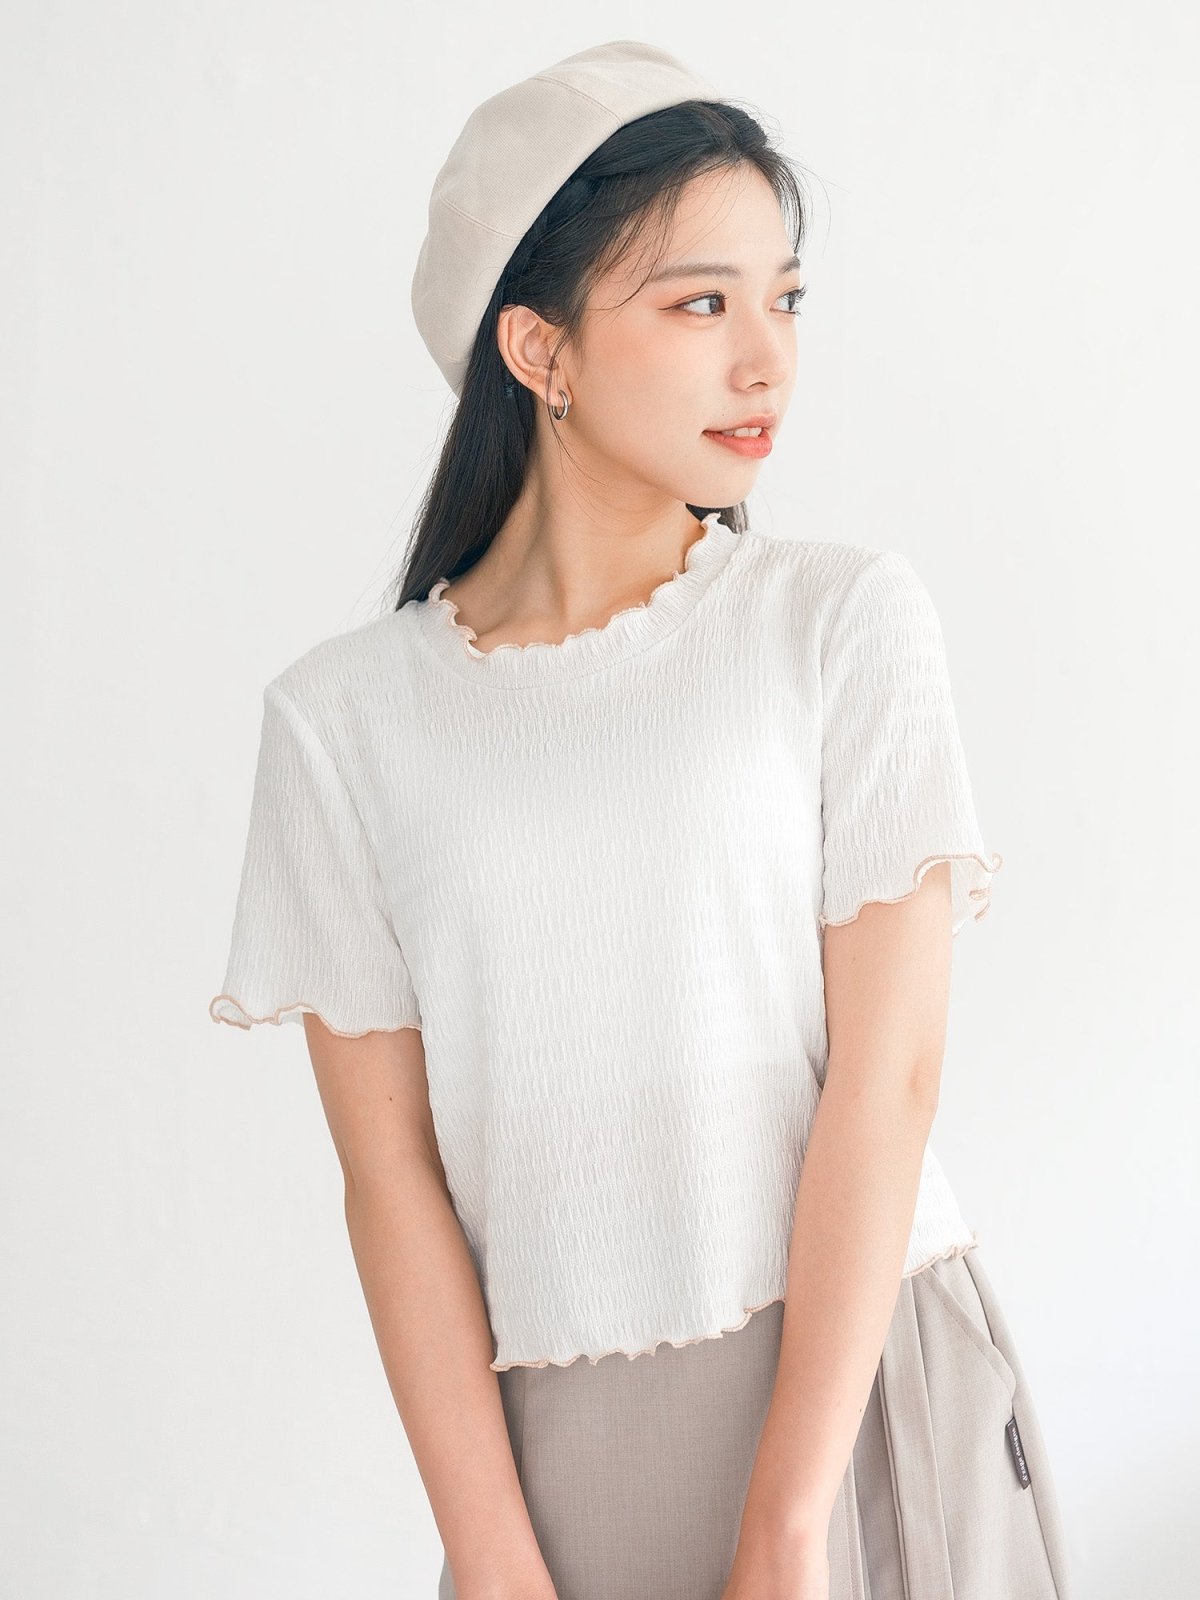 Eve Must-Have Wrinkle Ruffle Tee - DAG-DD0363-23WhitePinkS - White With Pink Hem - S - D'ZAGE Designs